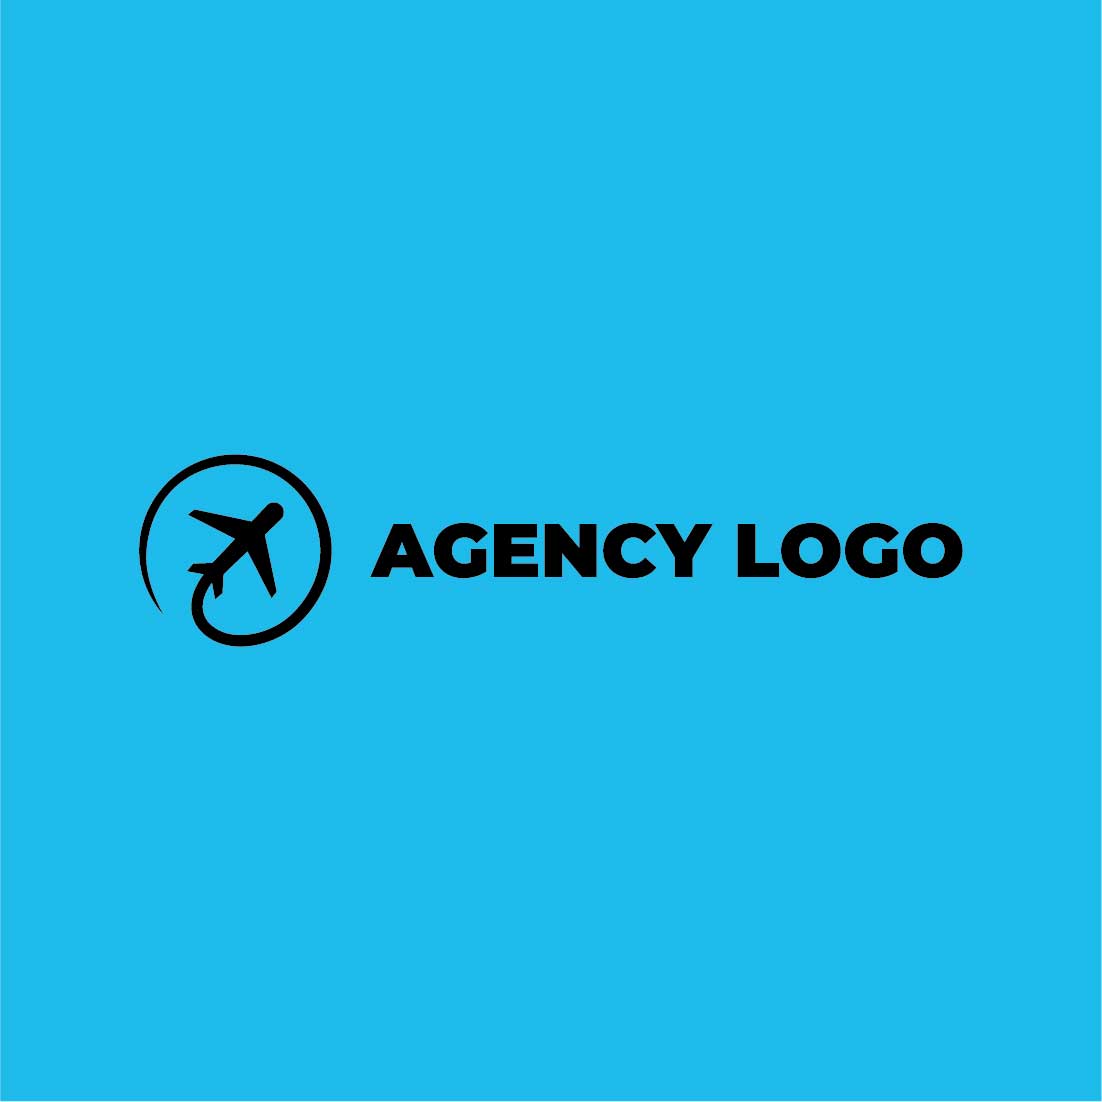 Vector logo design templates for airlines, airplane tickets, travel agencies, Agency Logo - planes and emblems preview image.